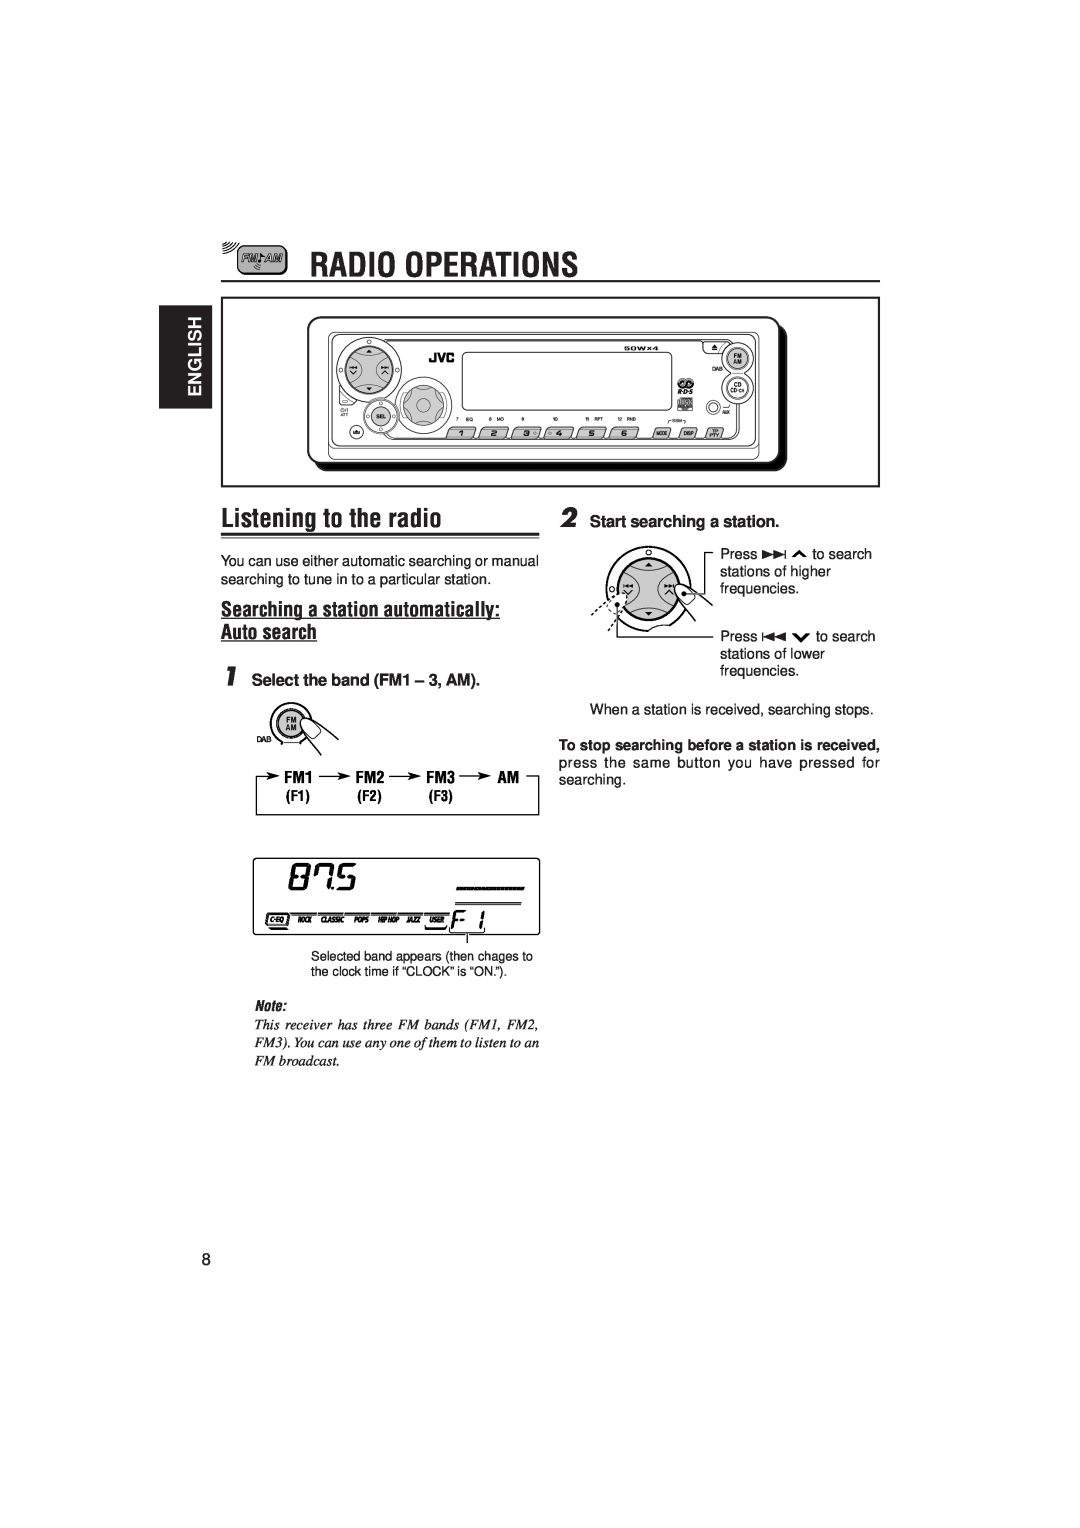 JVC KD-SX921R Radio Operations, Listening to the radio, Searching a station automatically: Auto search, English, F1 F2 F3 